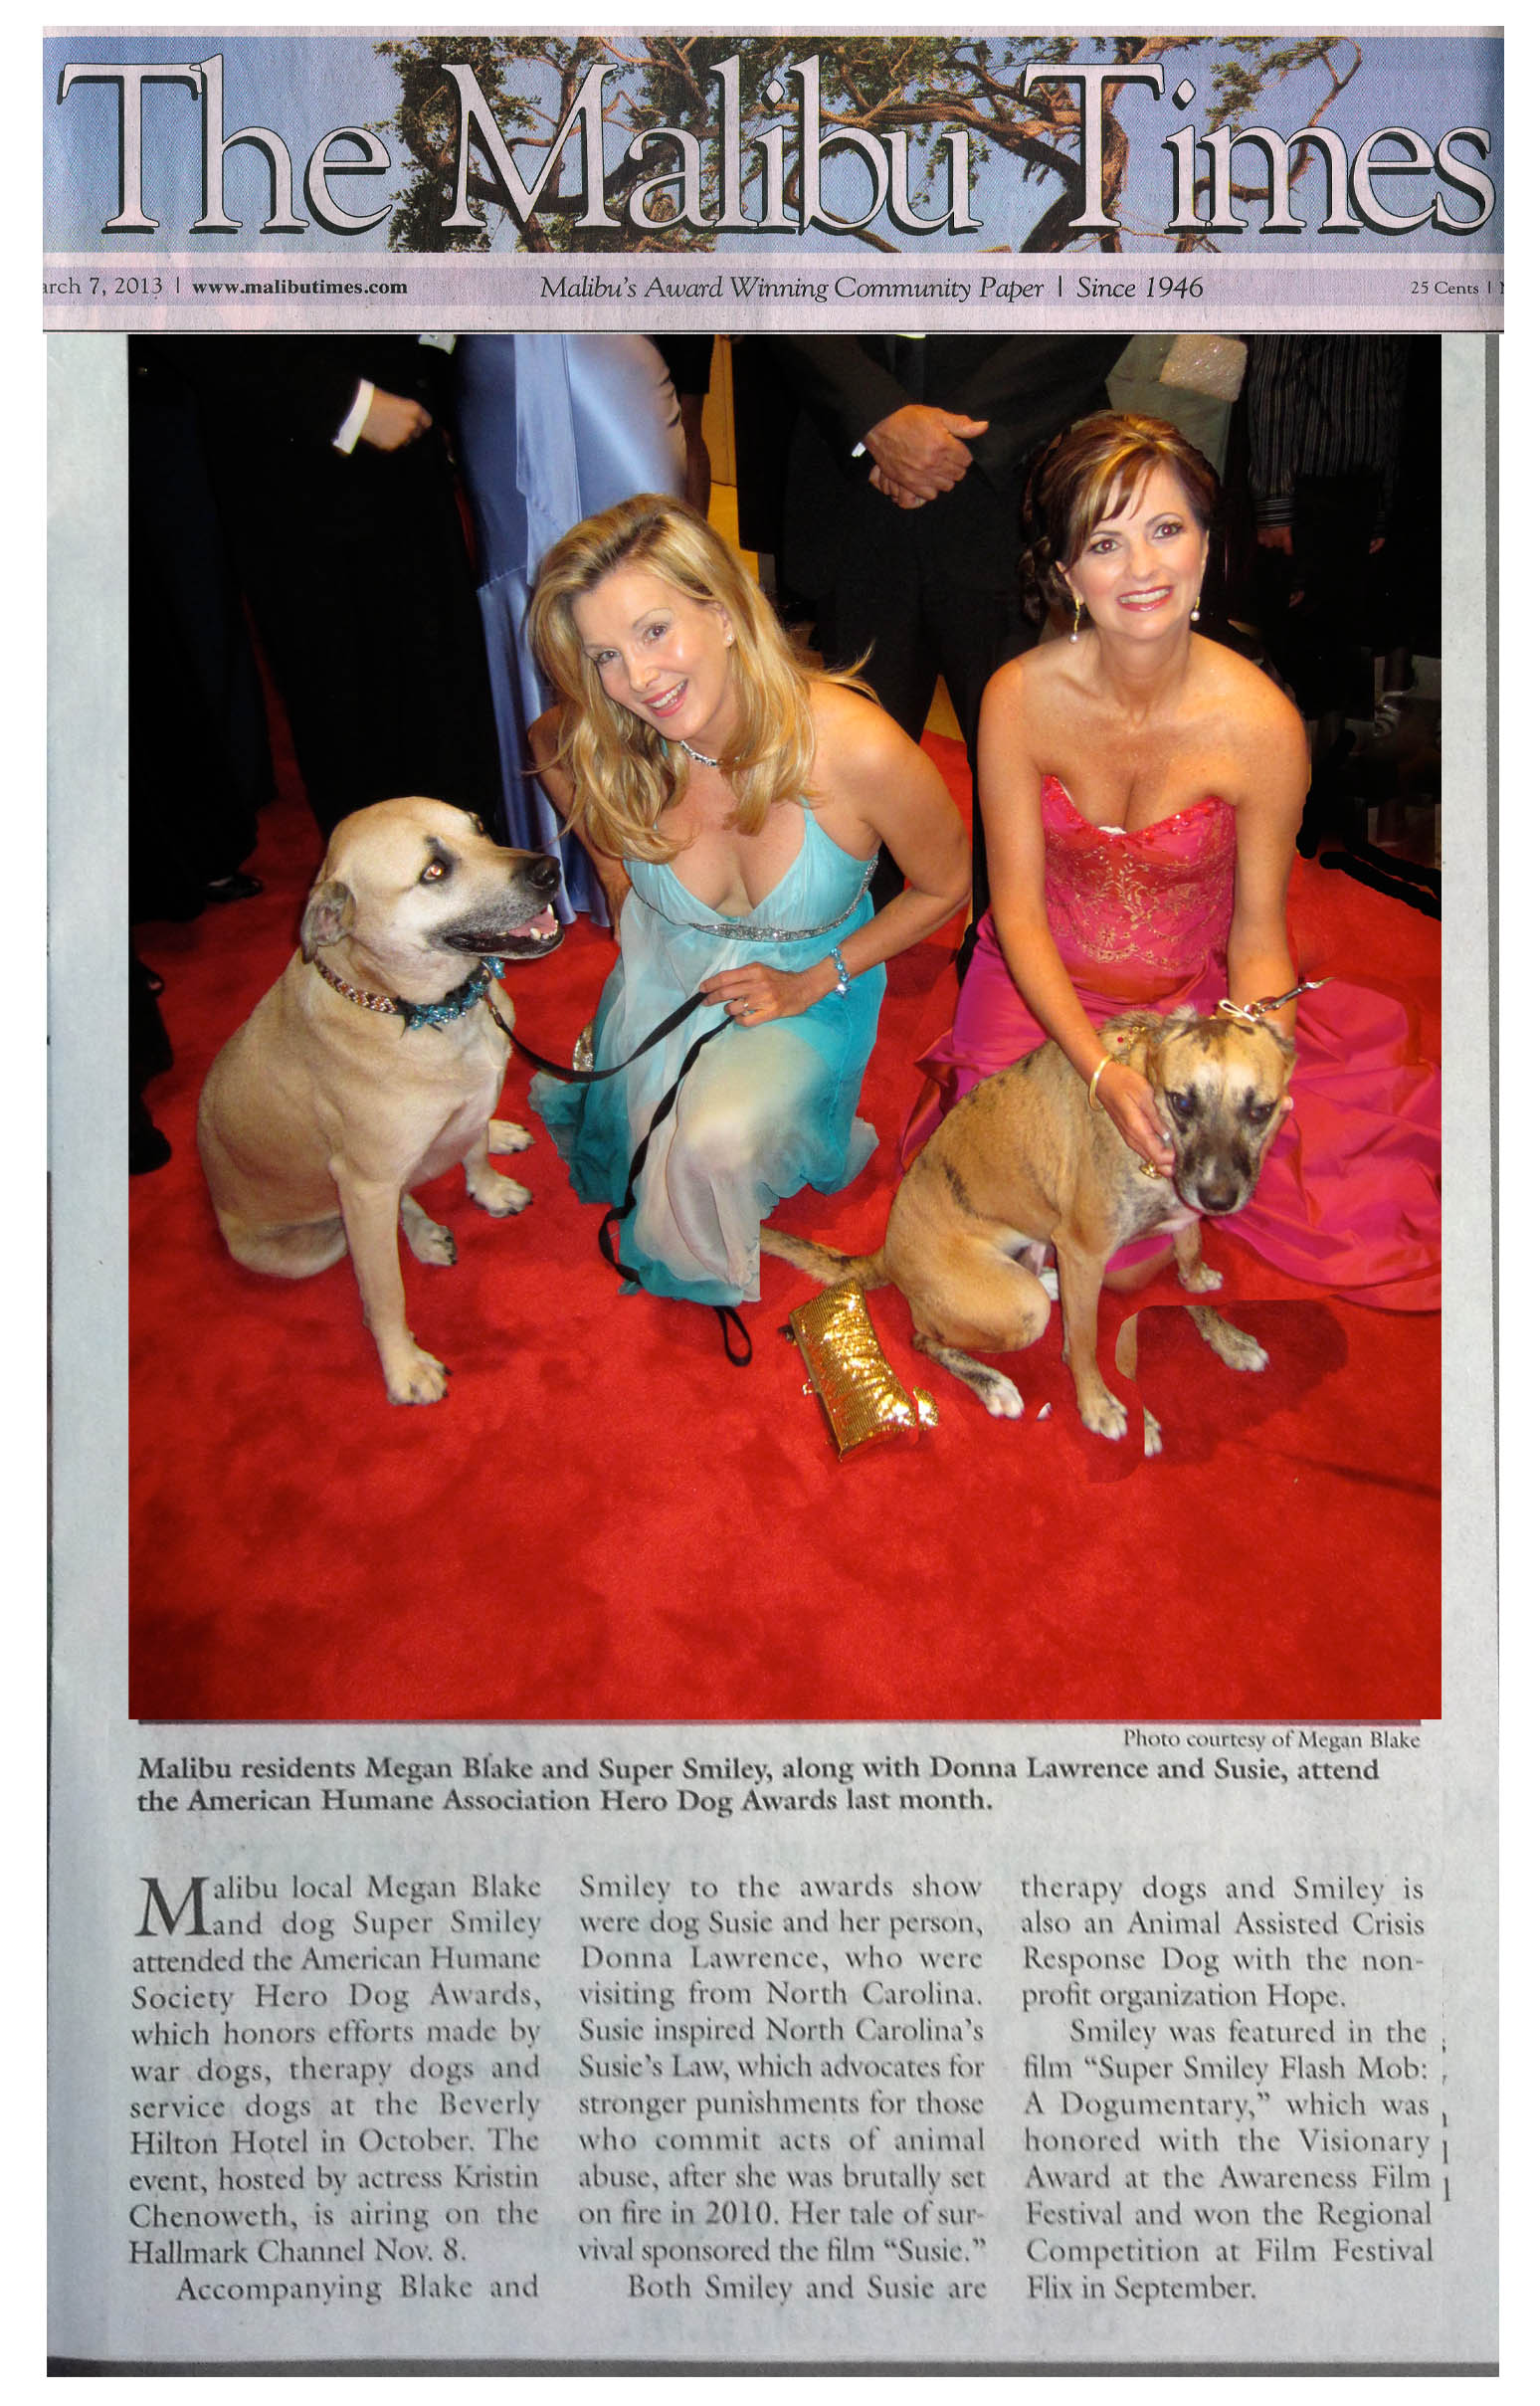 Super Smiley on the 2012 Hero Dog Awards Red Carpet as an actor from the film 